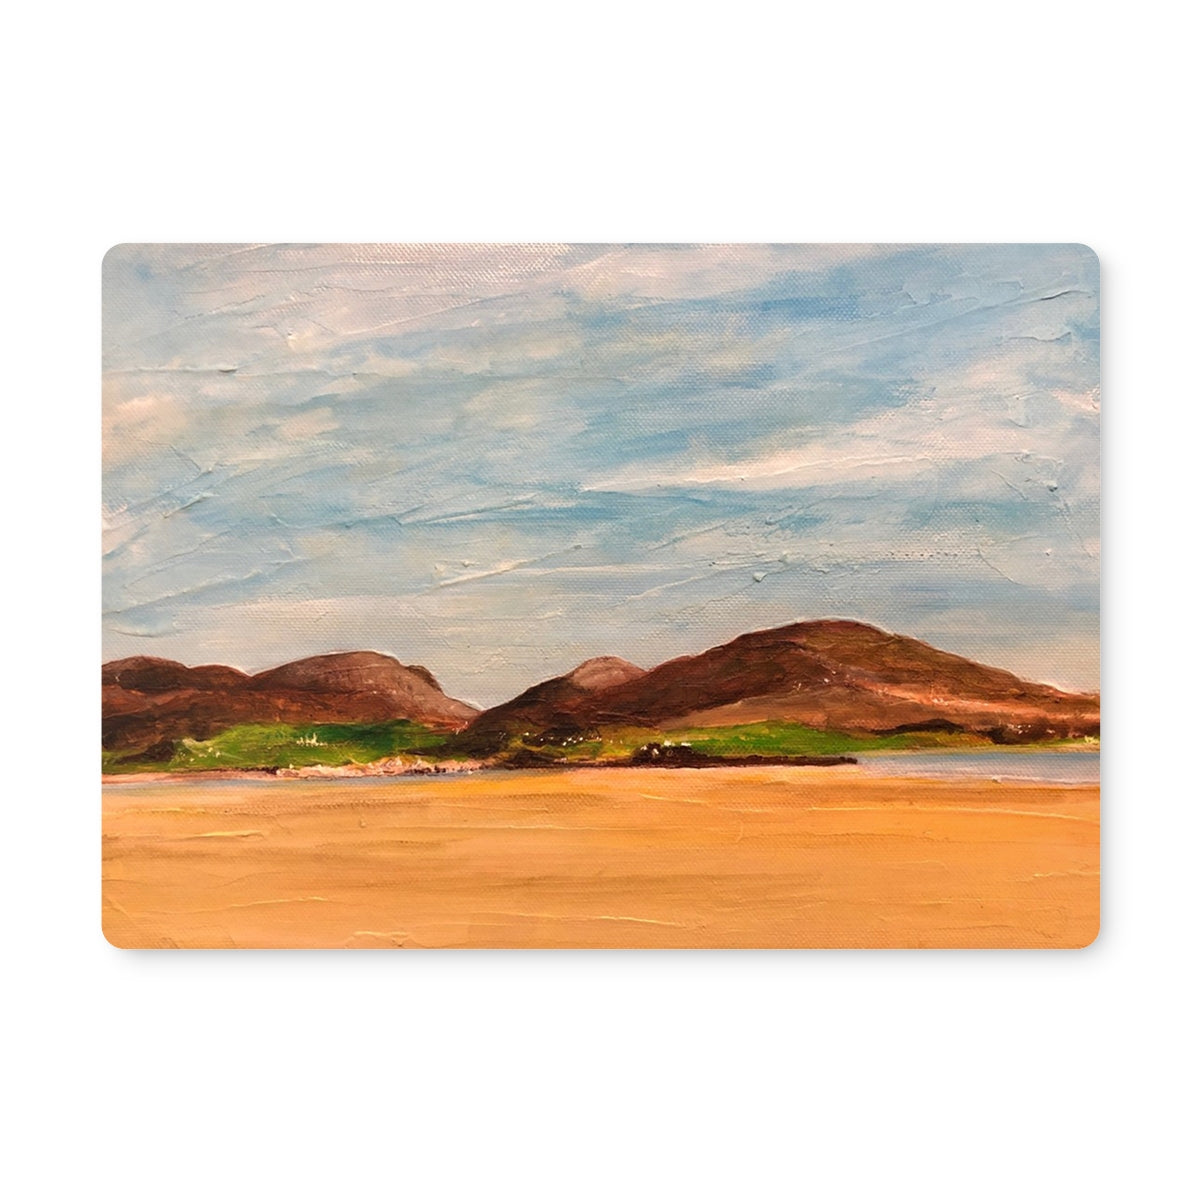 Uig Sands Lewis Art Gifts Placemat-Placemats-Hebridean Islands Art Gallery-Single Placemat-Paintings, Prints, Homeware, Art Gifts From Scotland By Scottish Artist Kevin Hunter